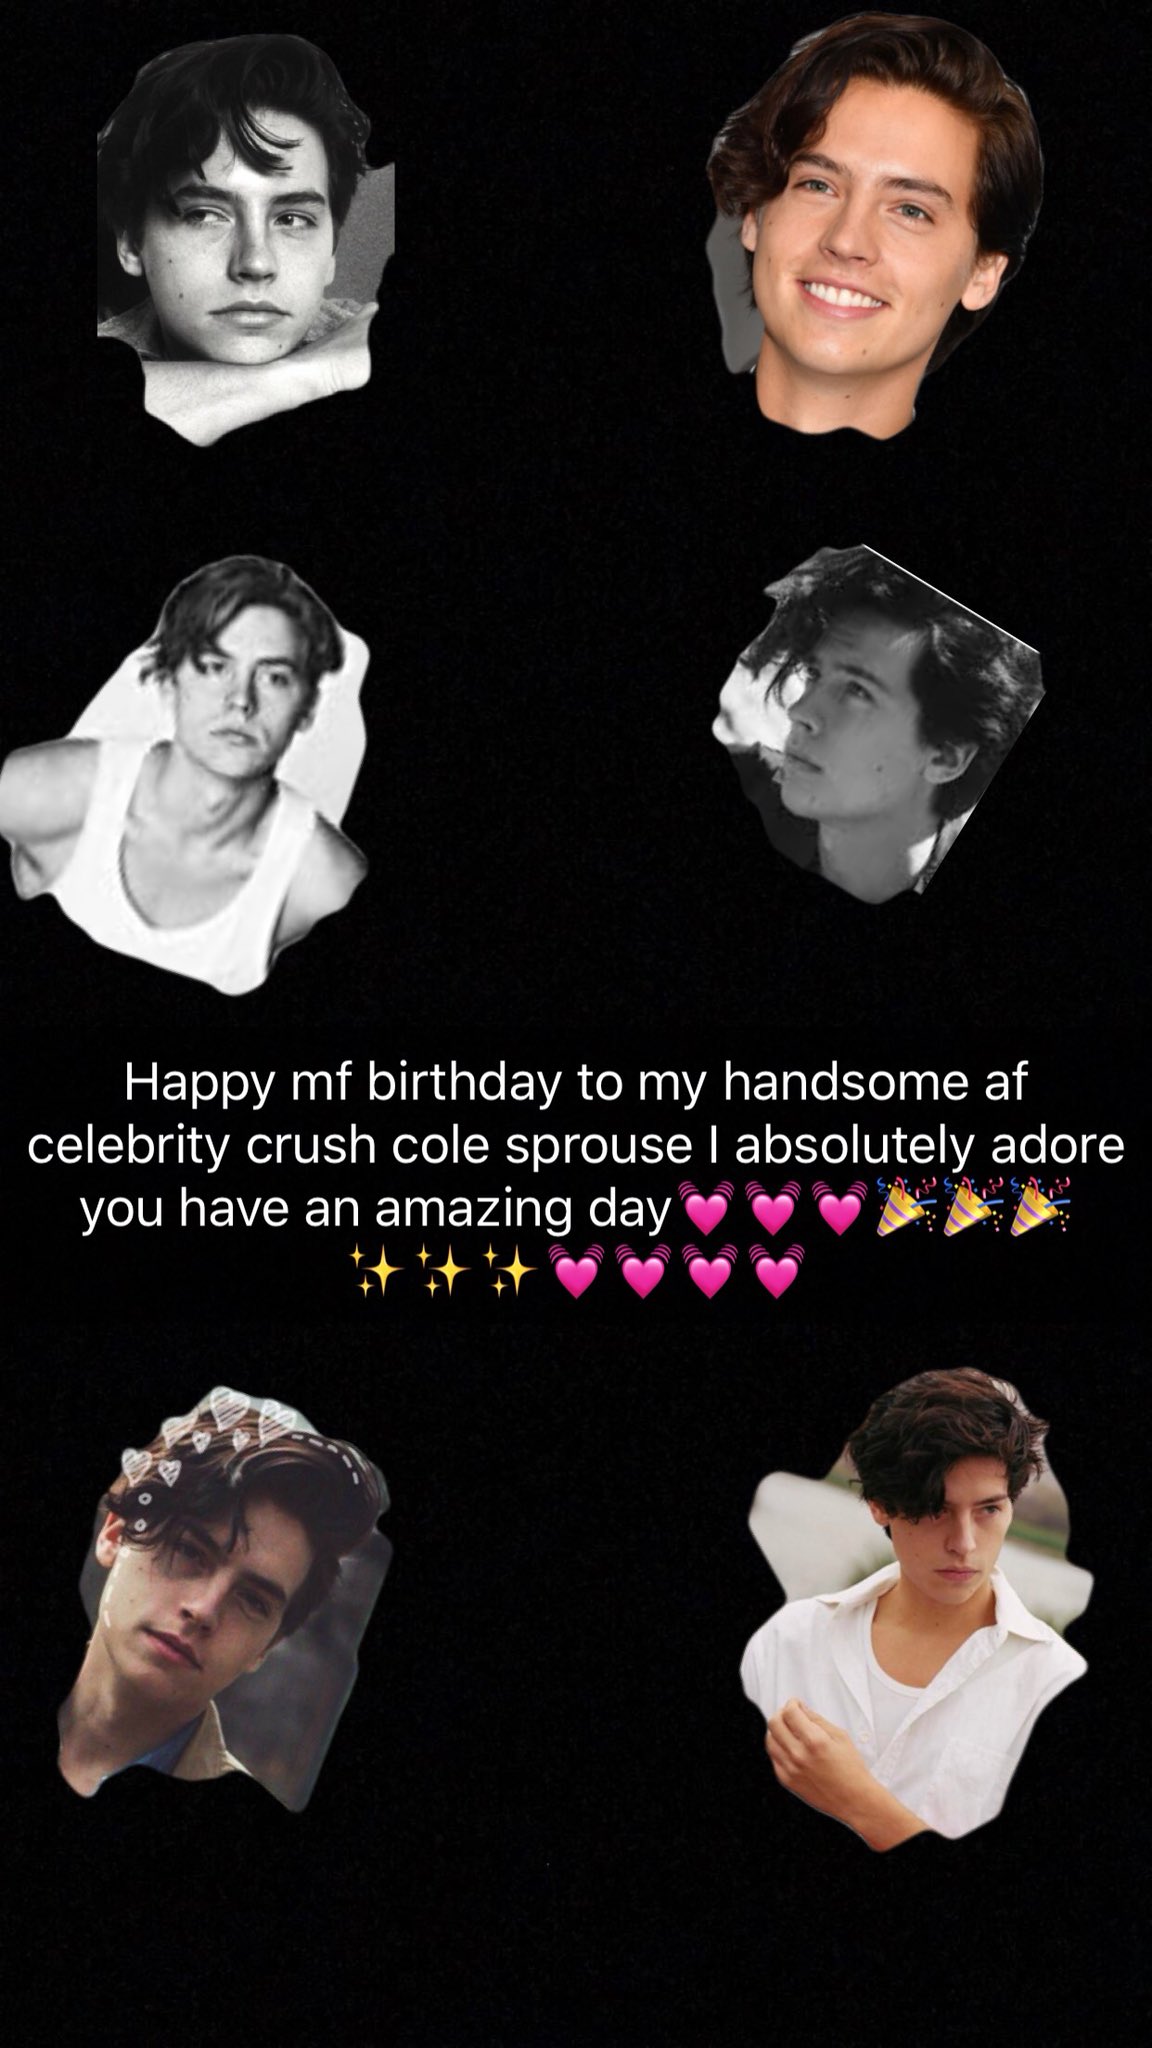 Happy birthday Cole sprouse have an amazing day              